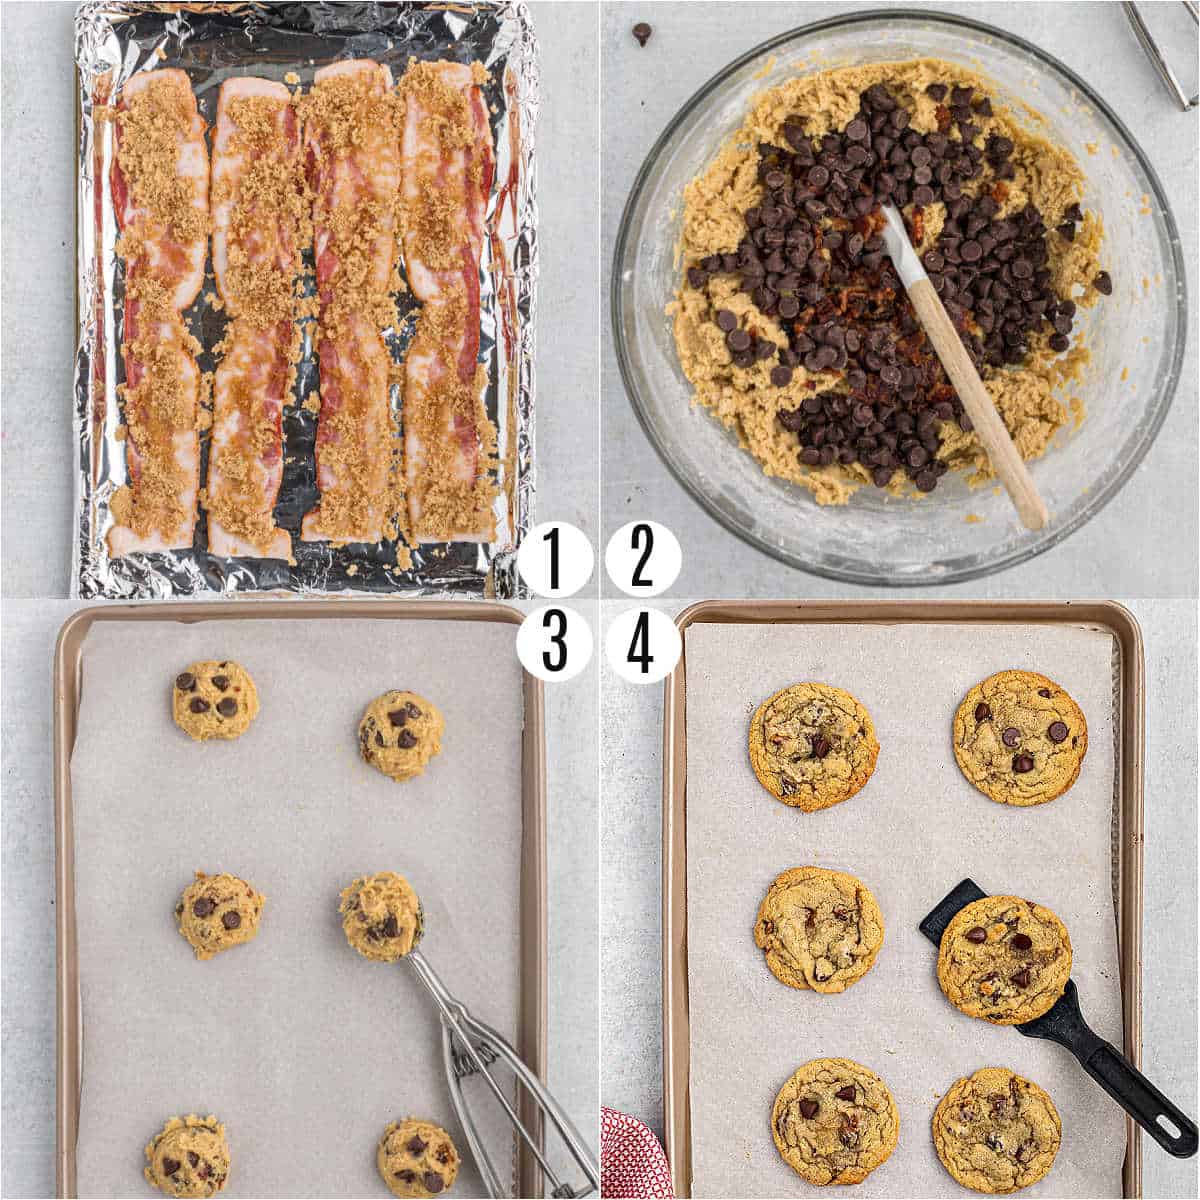 Step by step photos showing how to make maple bacon cookies.